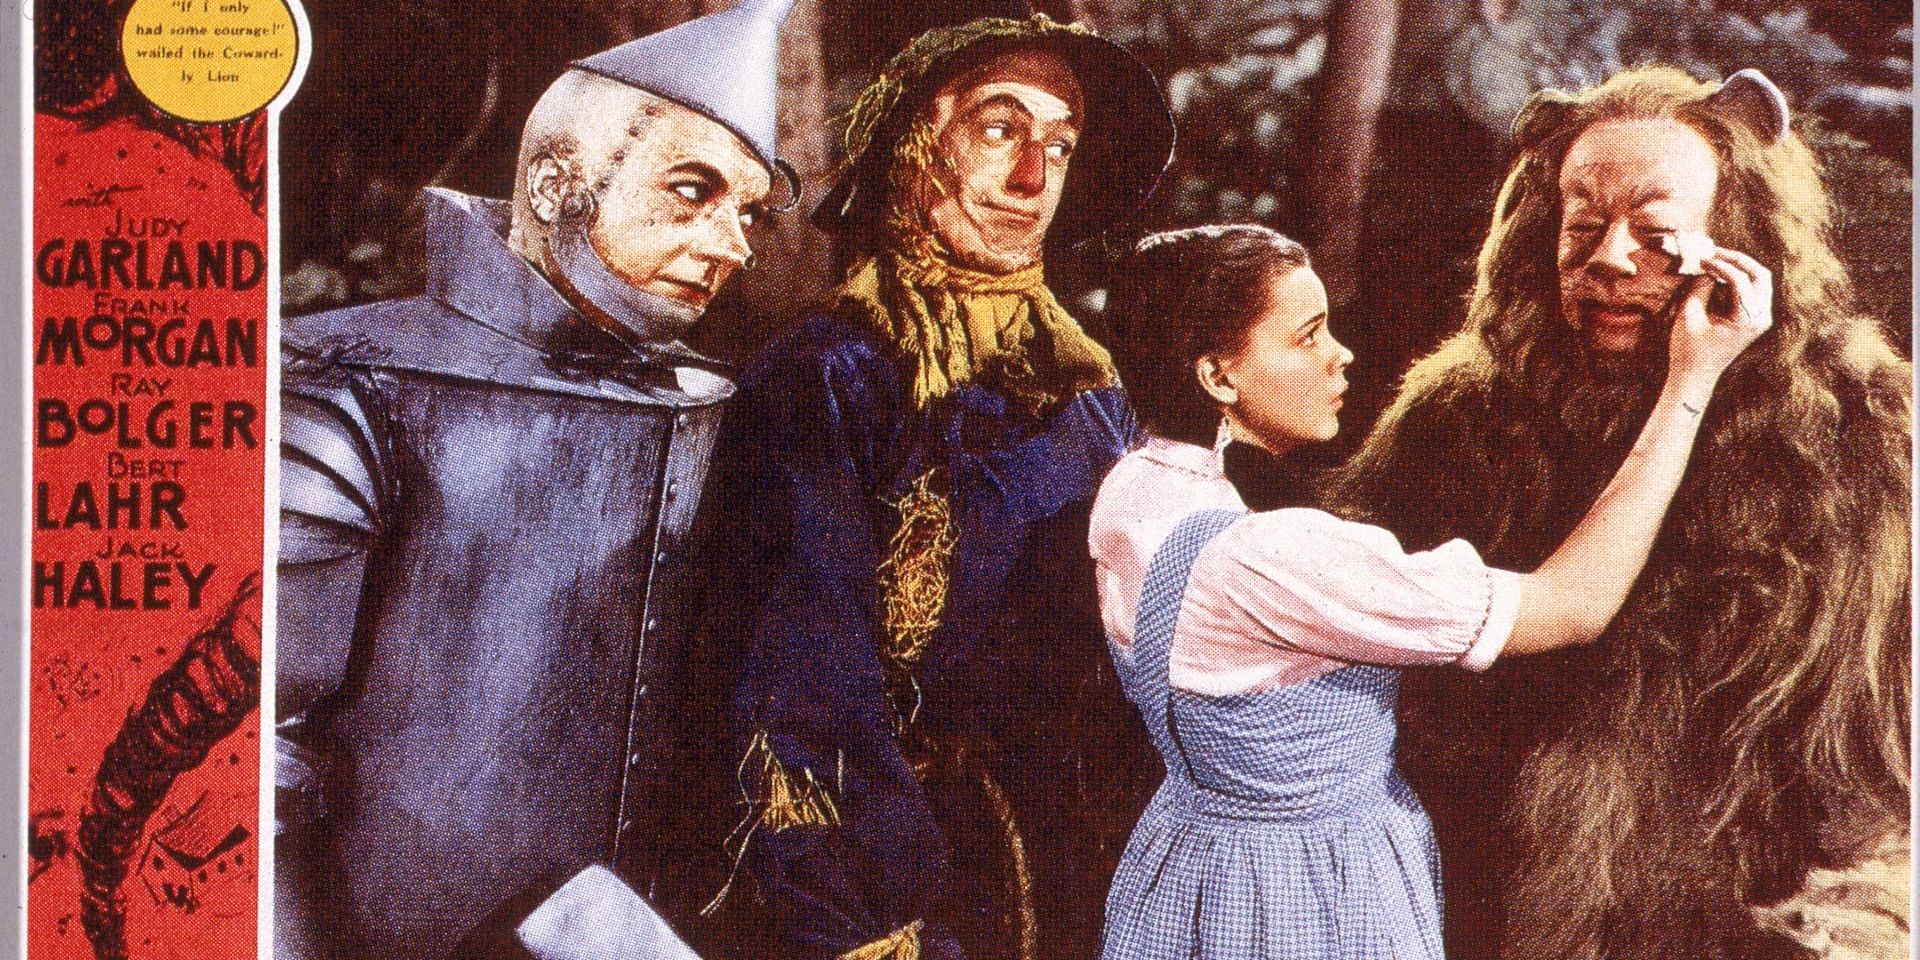 A promotional poser for the 1939 film The Wizard of Oz.